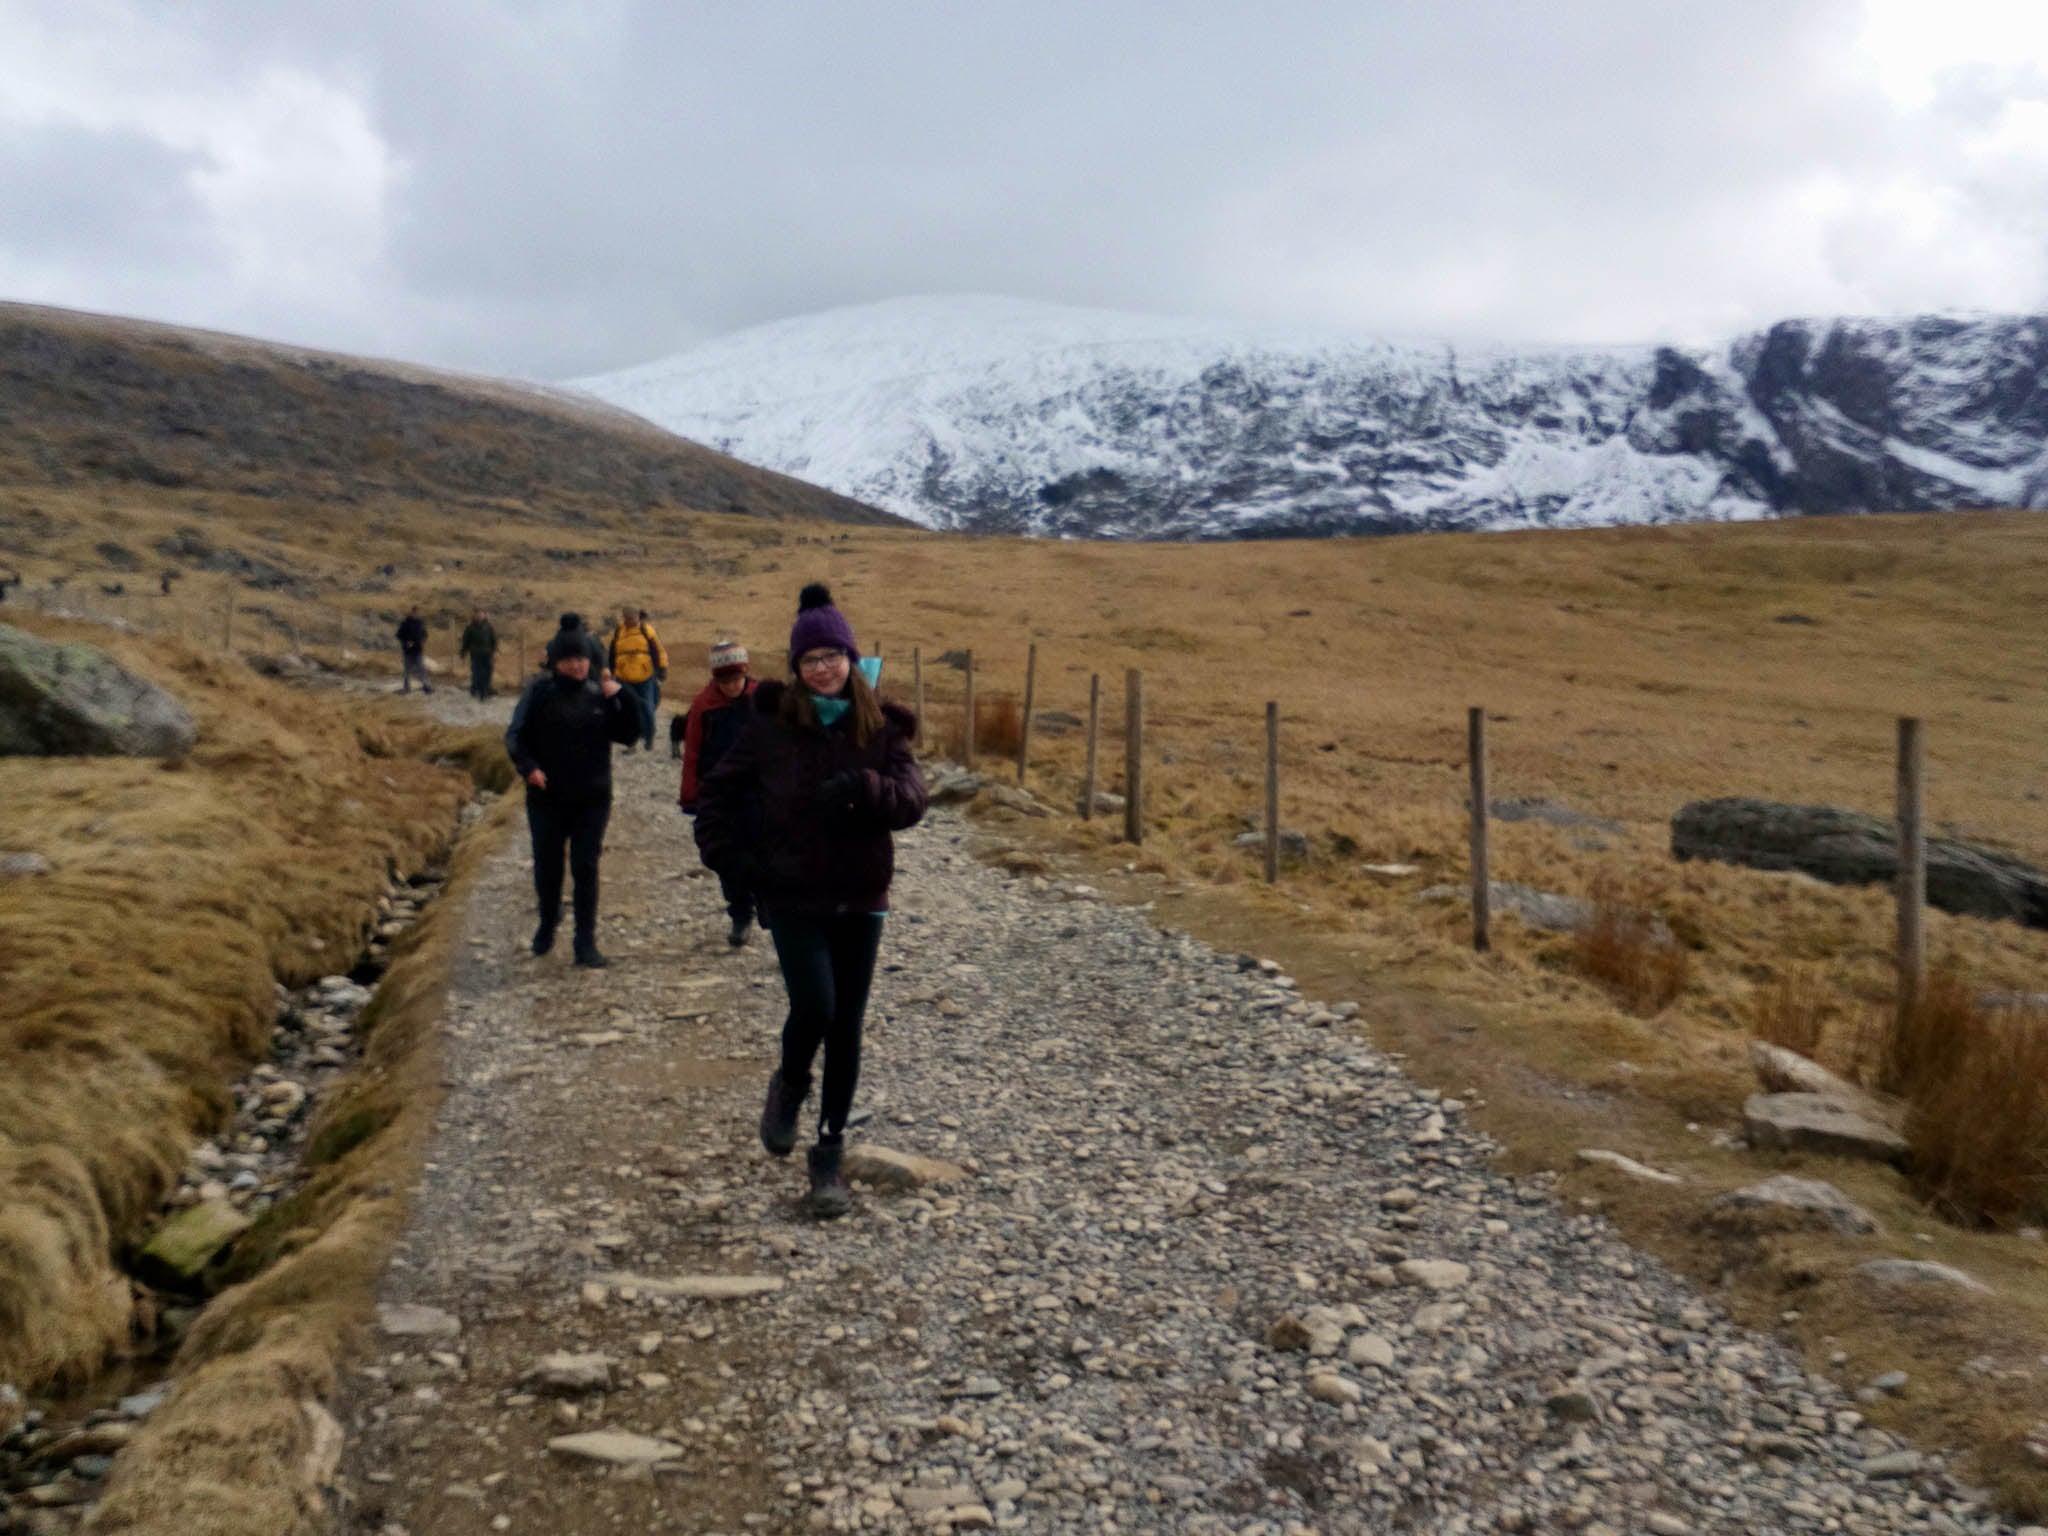 We’re taking on Snowdon, Sca Fell and Ben Nevis as a family to escape our sedentary London lifestyle